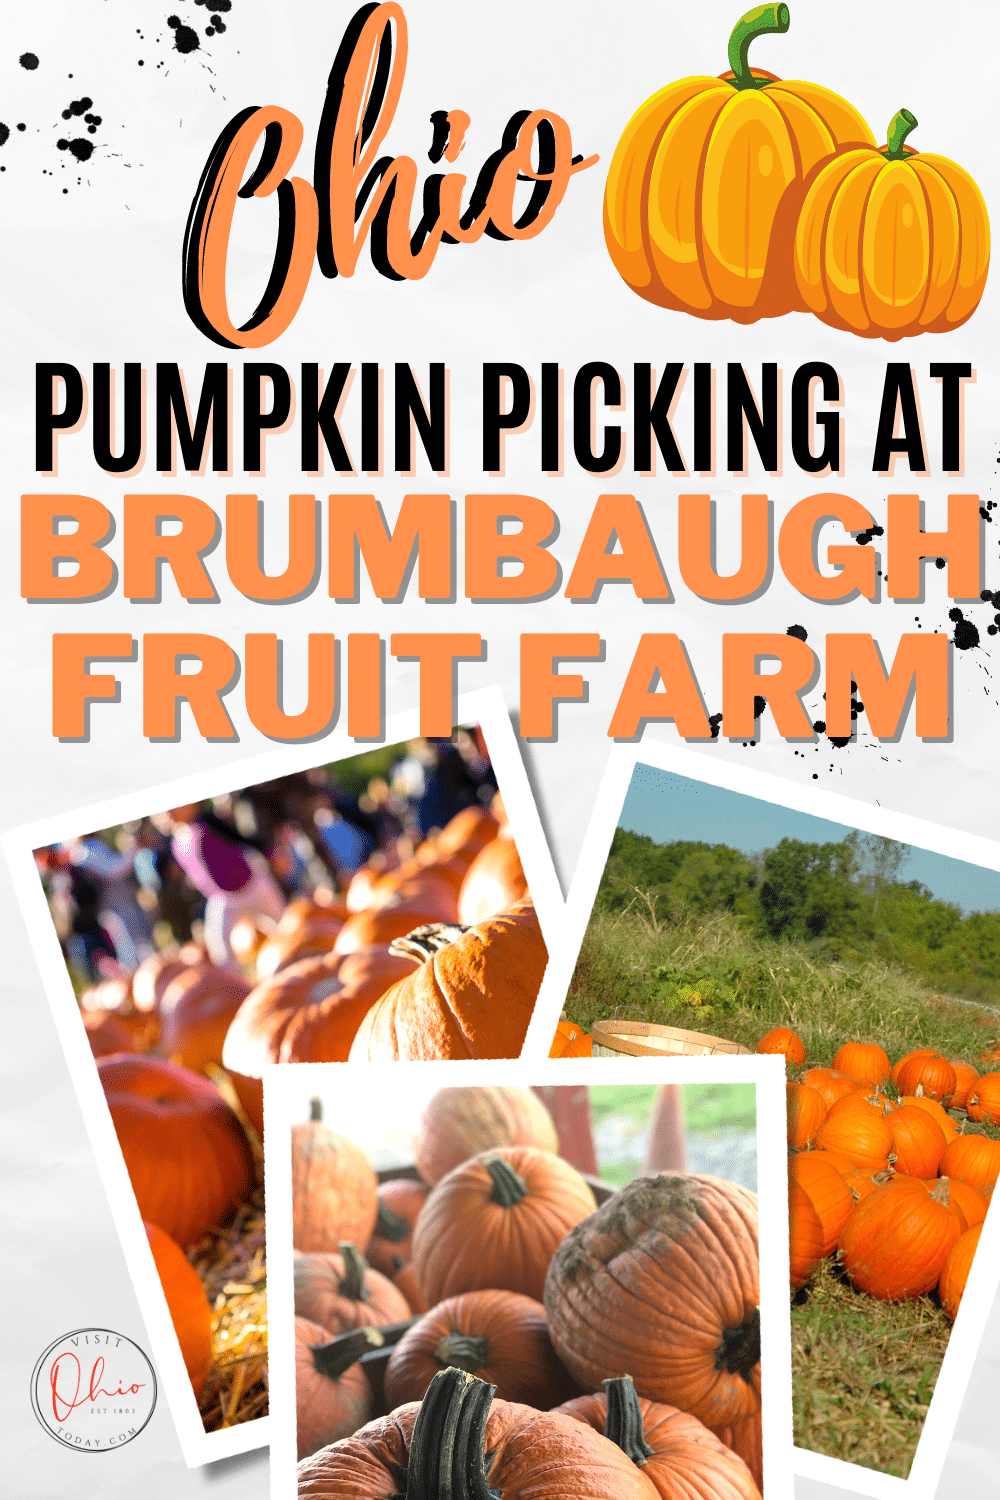 Brumbaugh Fruit Farm is located in Arcanum, Ohio. At Brumbaugh Fruit Farm you can find lots of fun Fall activities and Fall themed food.